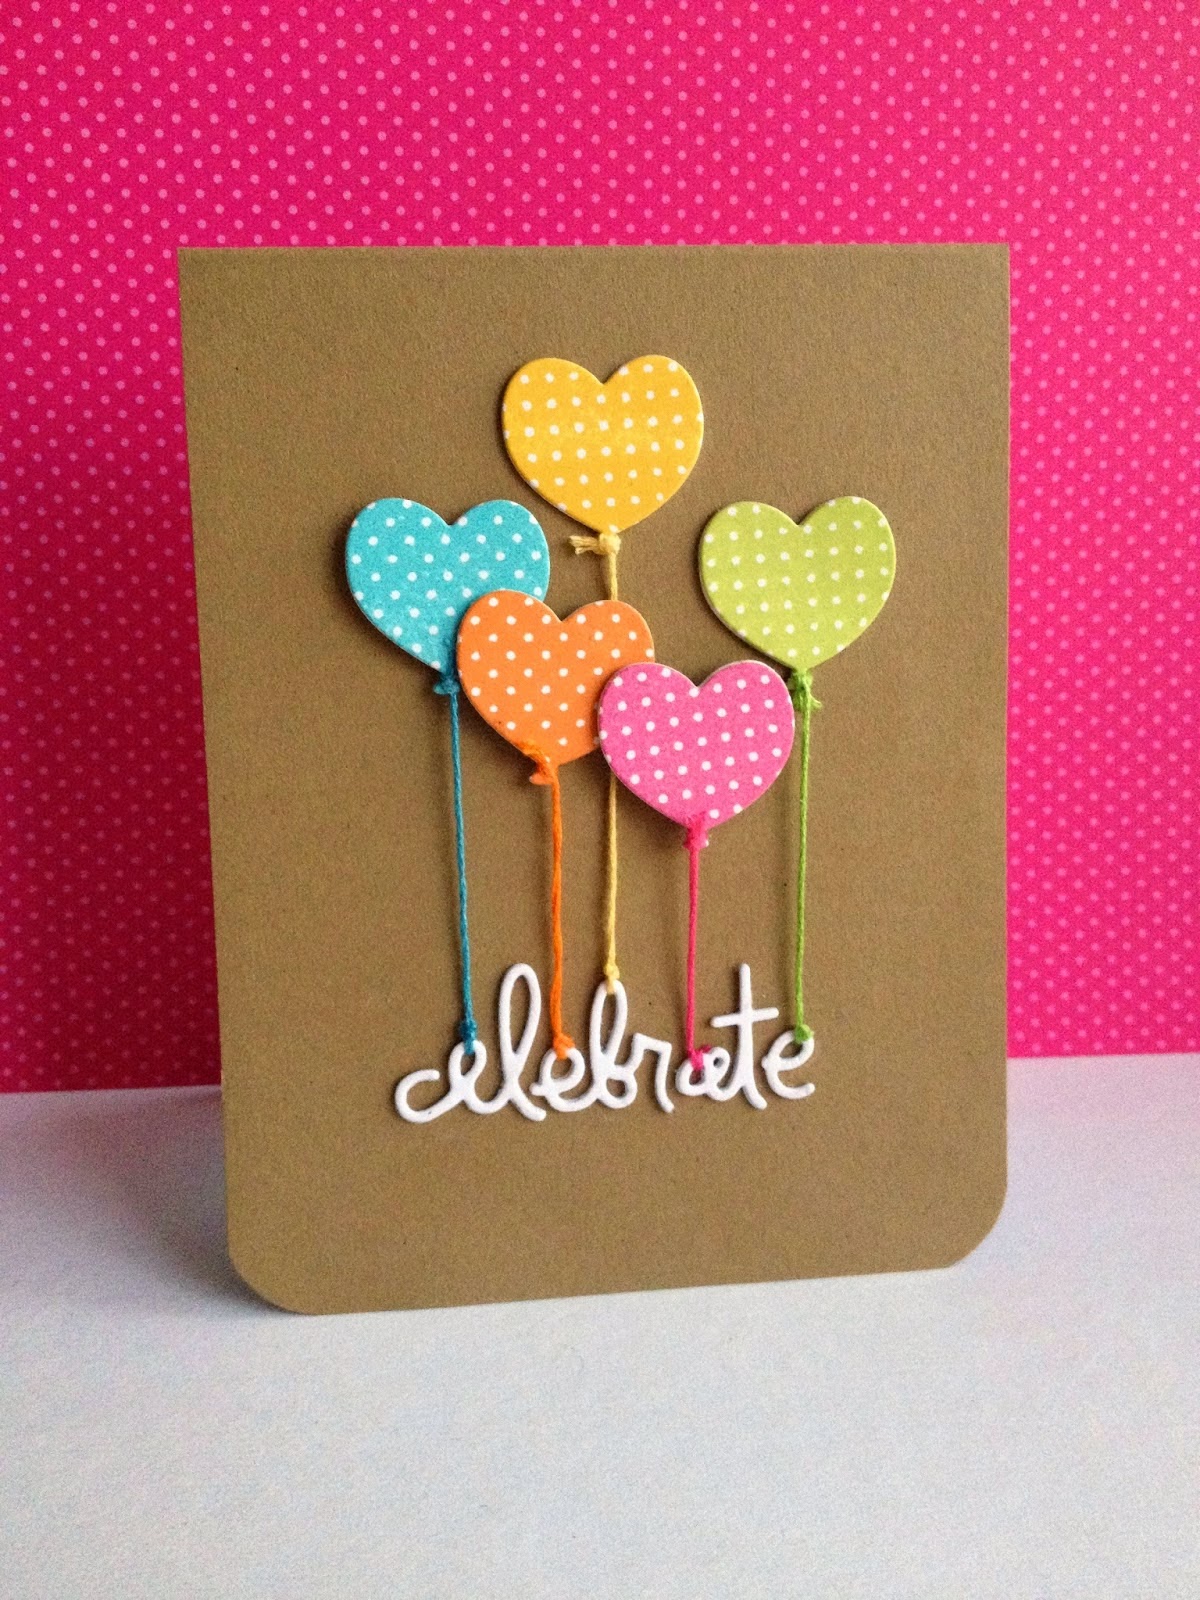 A Little Bit of Patti: 5 Great Ideas for Cute and Easy Balloon Themed Handmade Greeting Cards